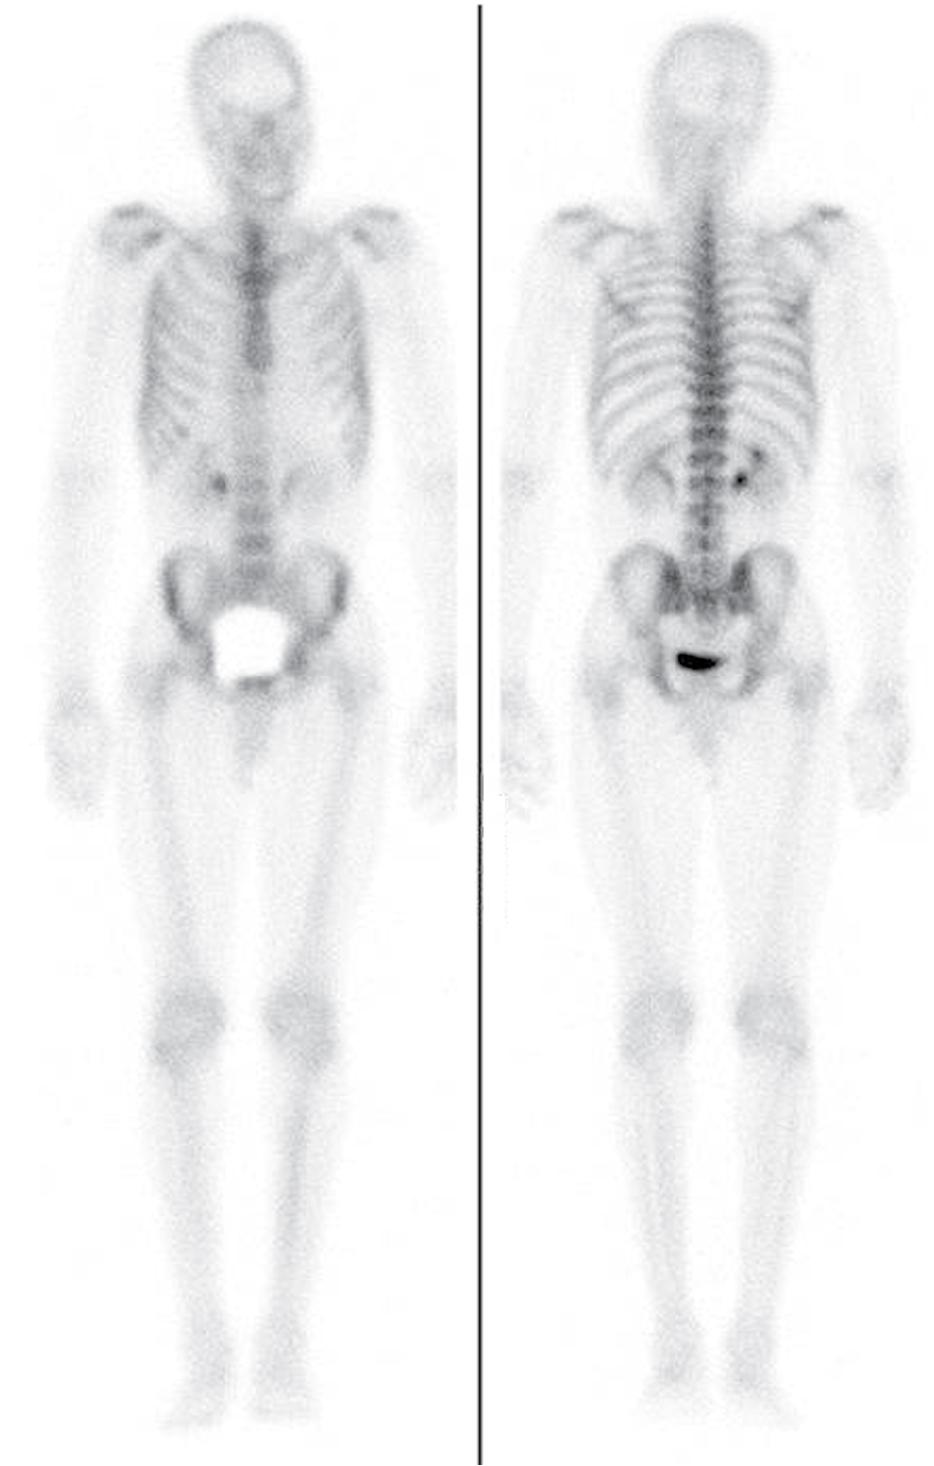 Fig. 12.1, Normal 99m Tc–MDP distribution on whole-body bone scan in anterior (left) and posterior (right) projections. Note uniform radiotracer uptake throughout bones with some uptake in kidneys and bladder.